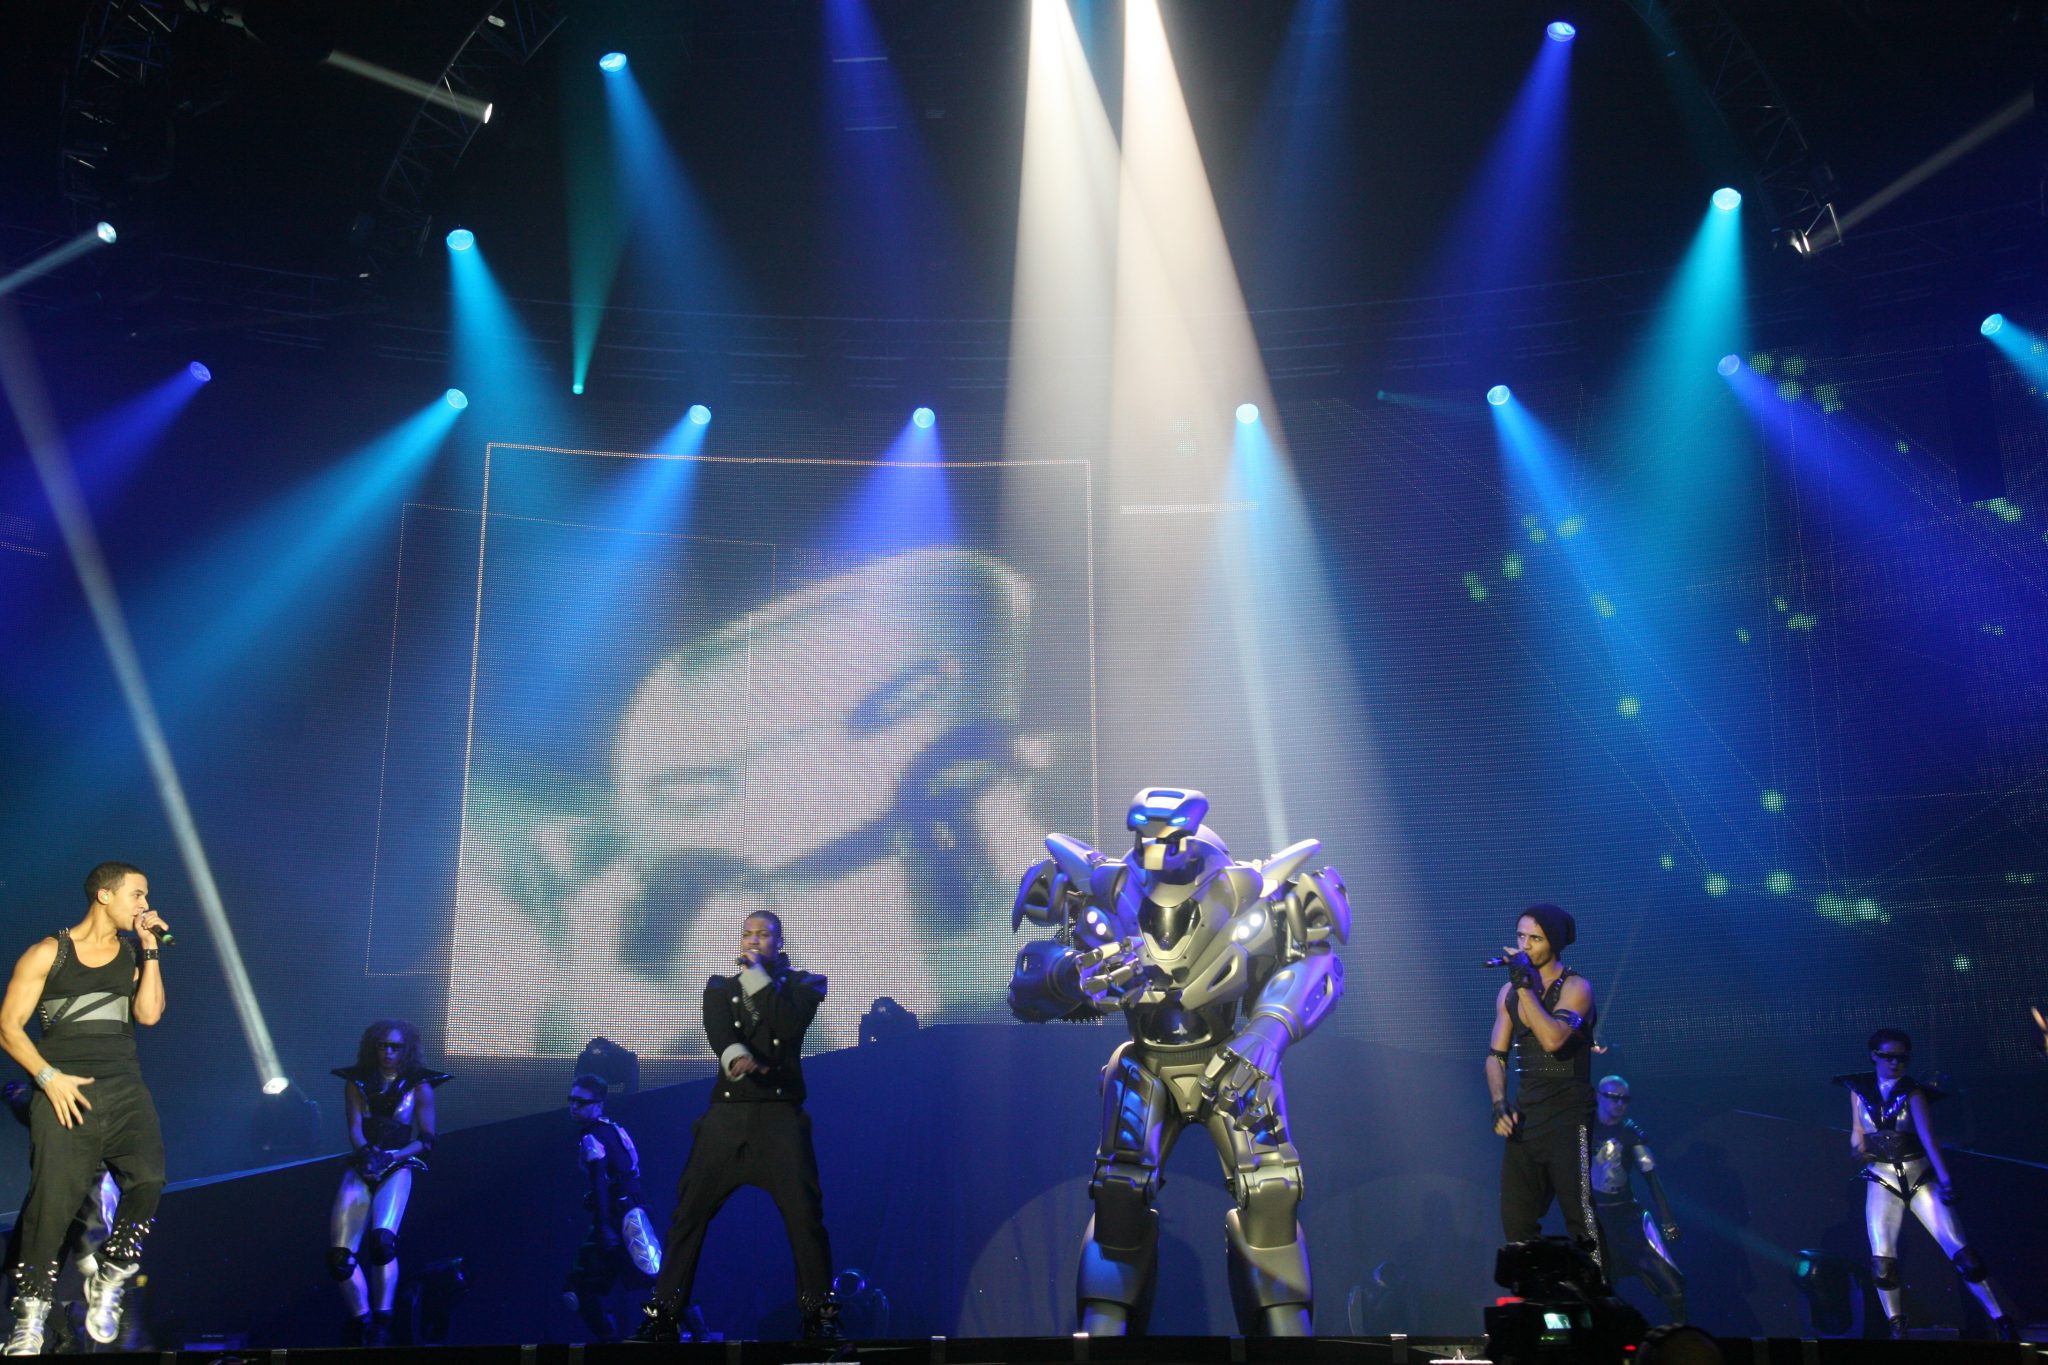 Titan the Robot live on stage with JLS.